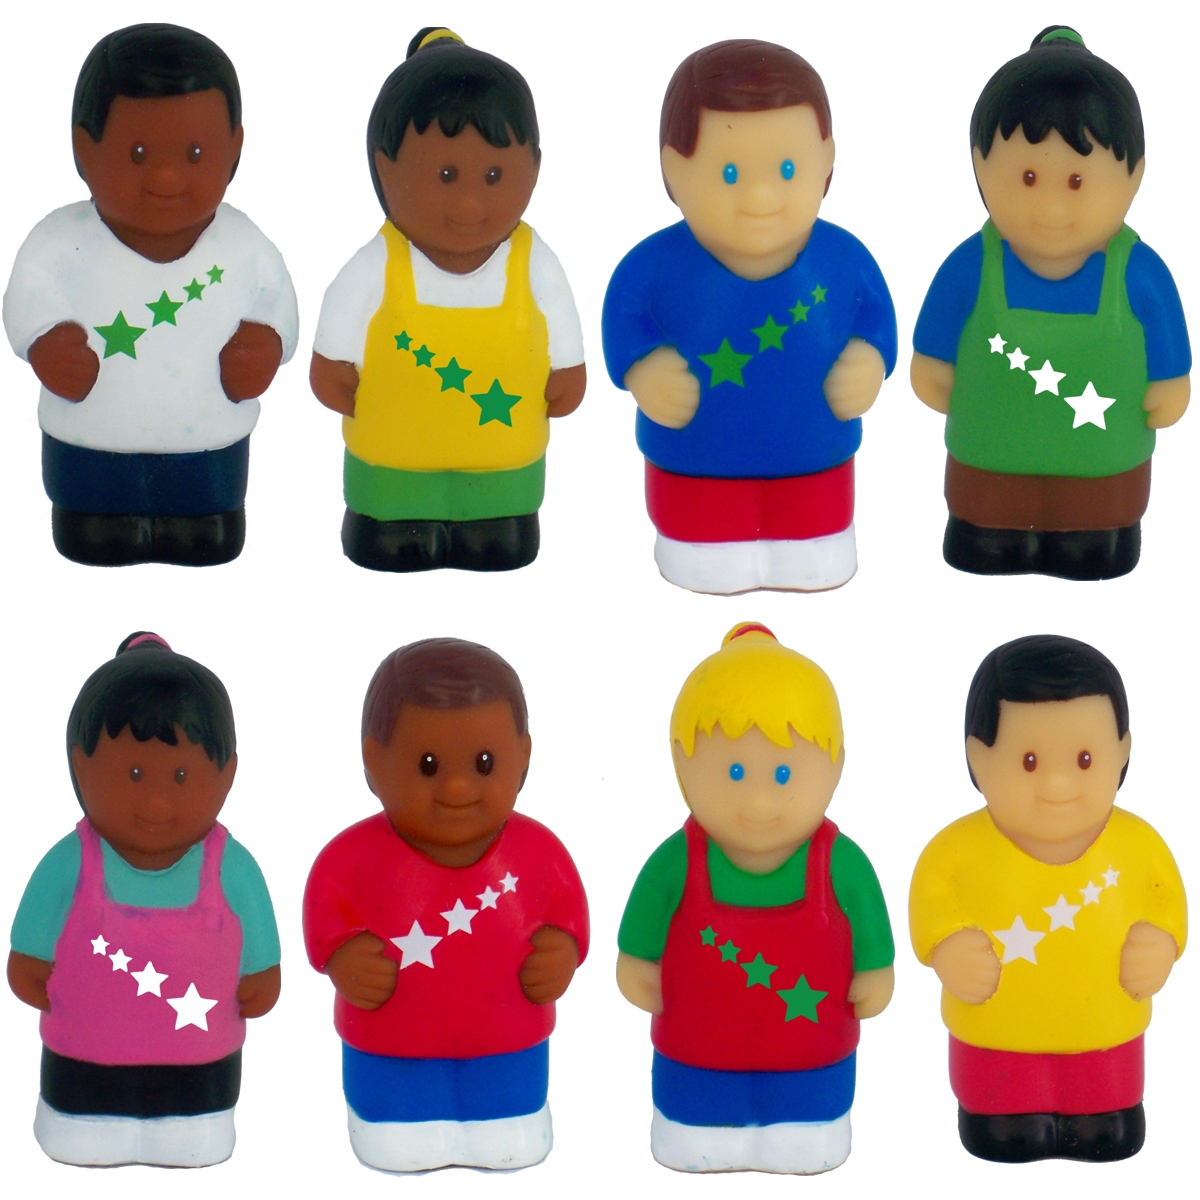 Picture of Get Ready 618 All Star Kids Multi-Cultural Children Figurines - Set of 8